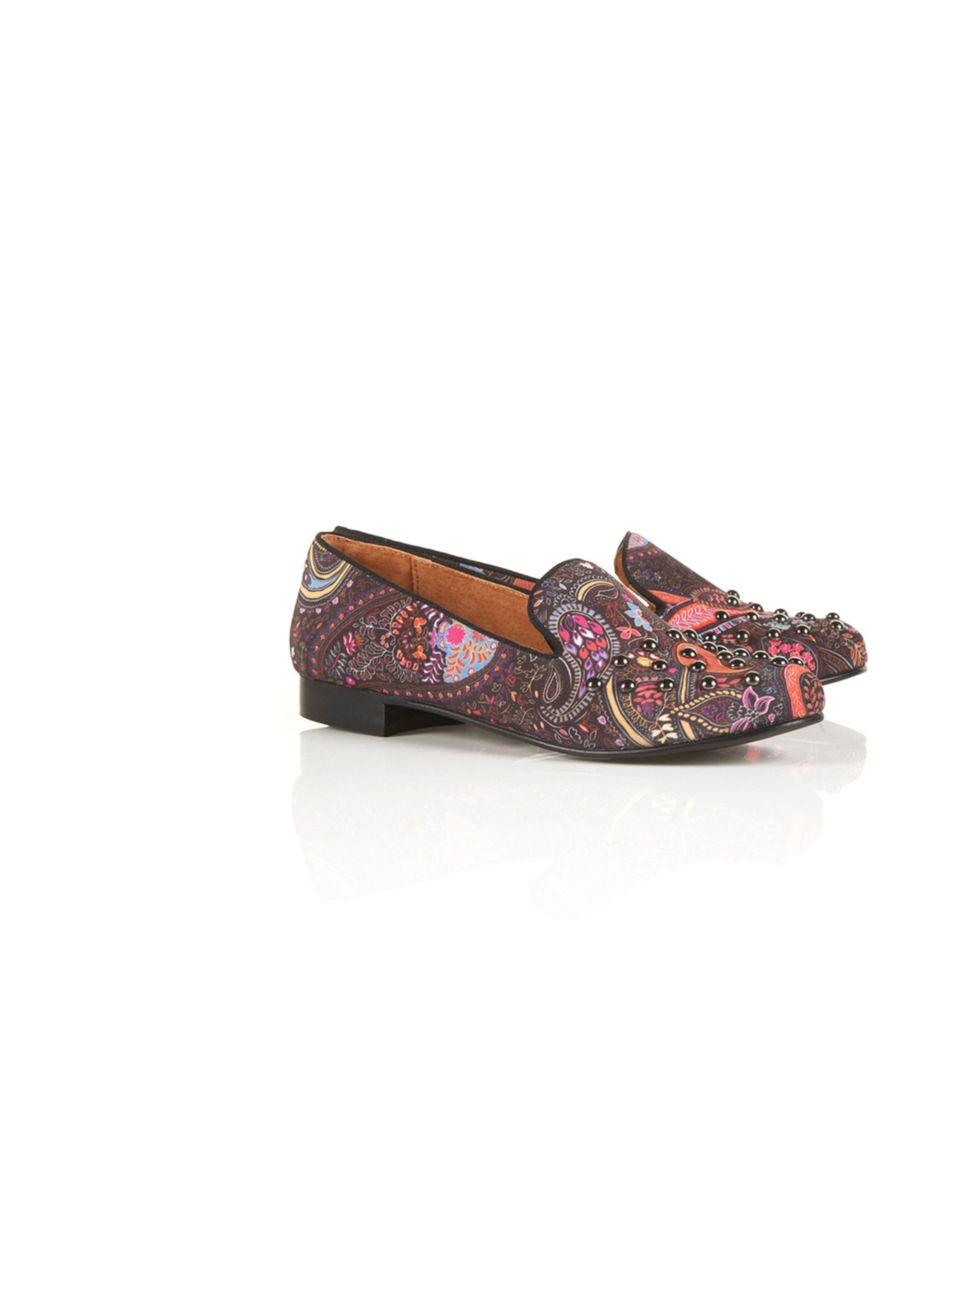 <p>Topshop studded paisley smoking slippers, £55</p><p><a href="http://shopping.elleuk.com/browse?fts=topshop+dandy+slippers">BUY NOW</a></p>